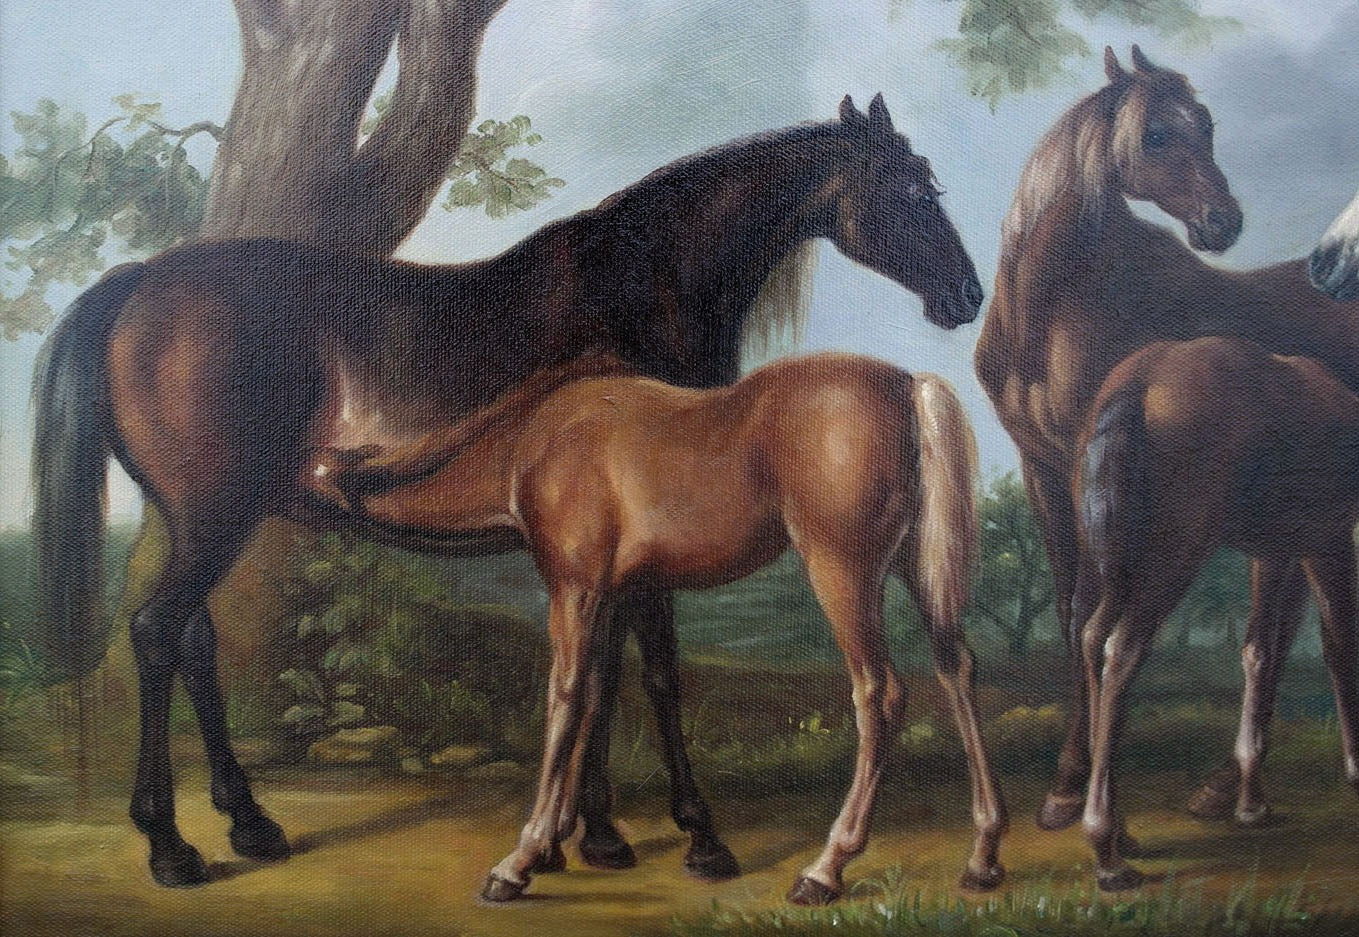 Oil Painting after 'Mares and Foals in a River Landscape' in style of George Stubbs